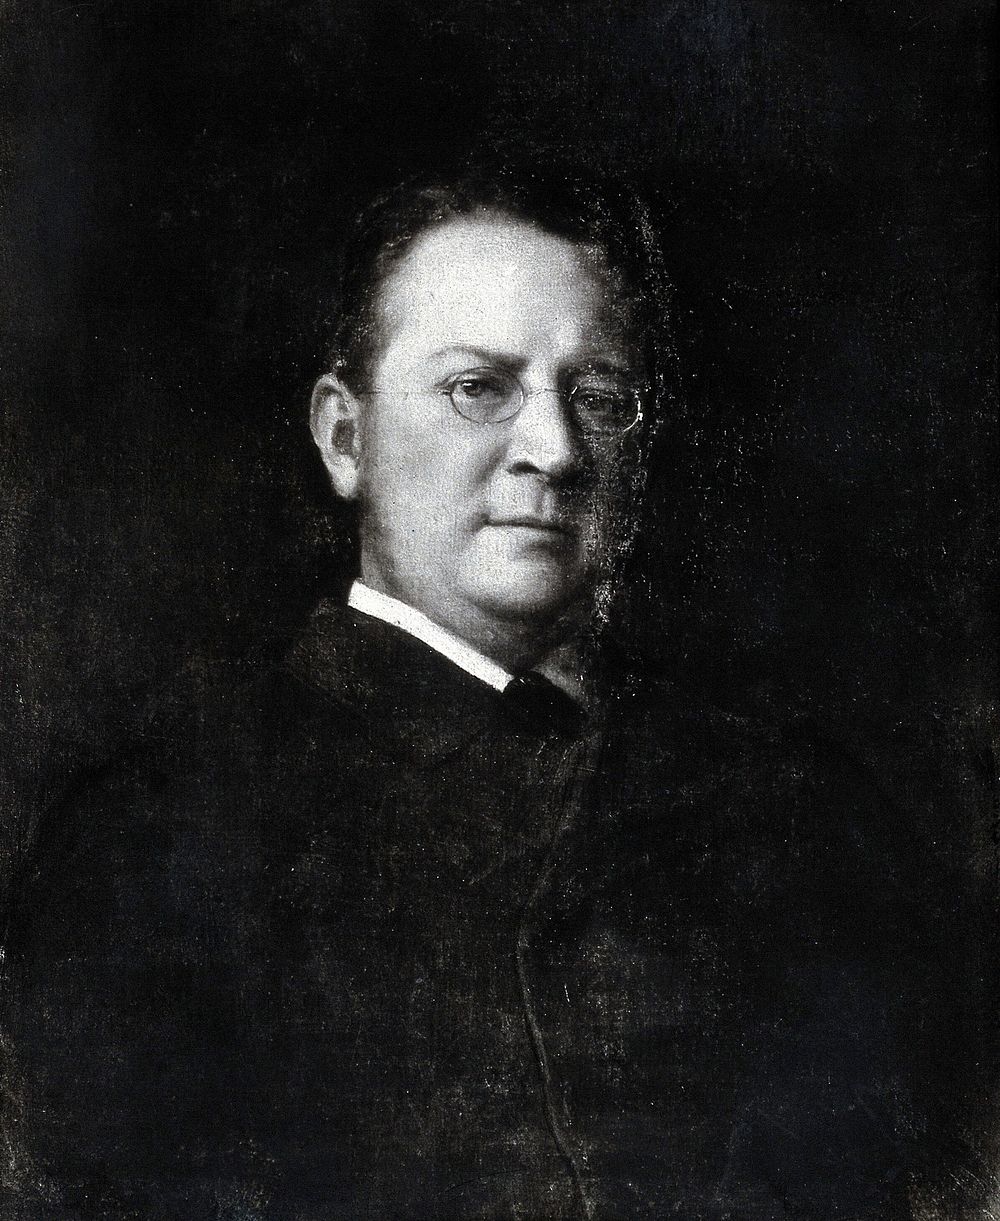 William Smoult Playfair. Photograph by A. C. Cooper.